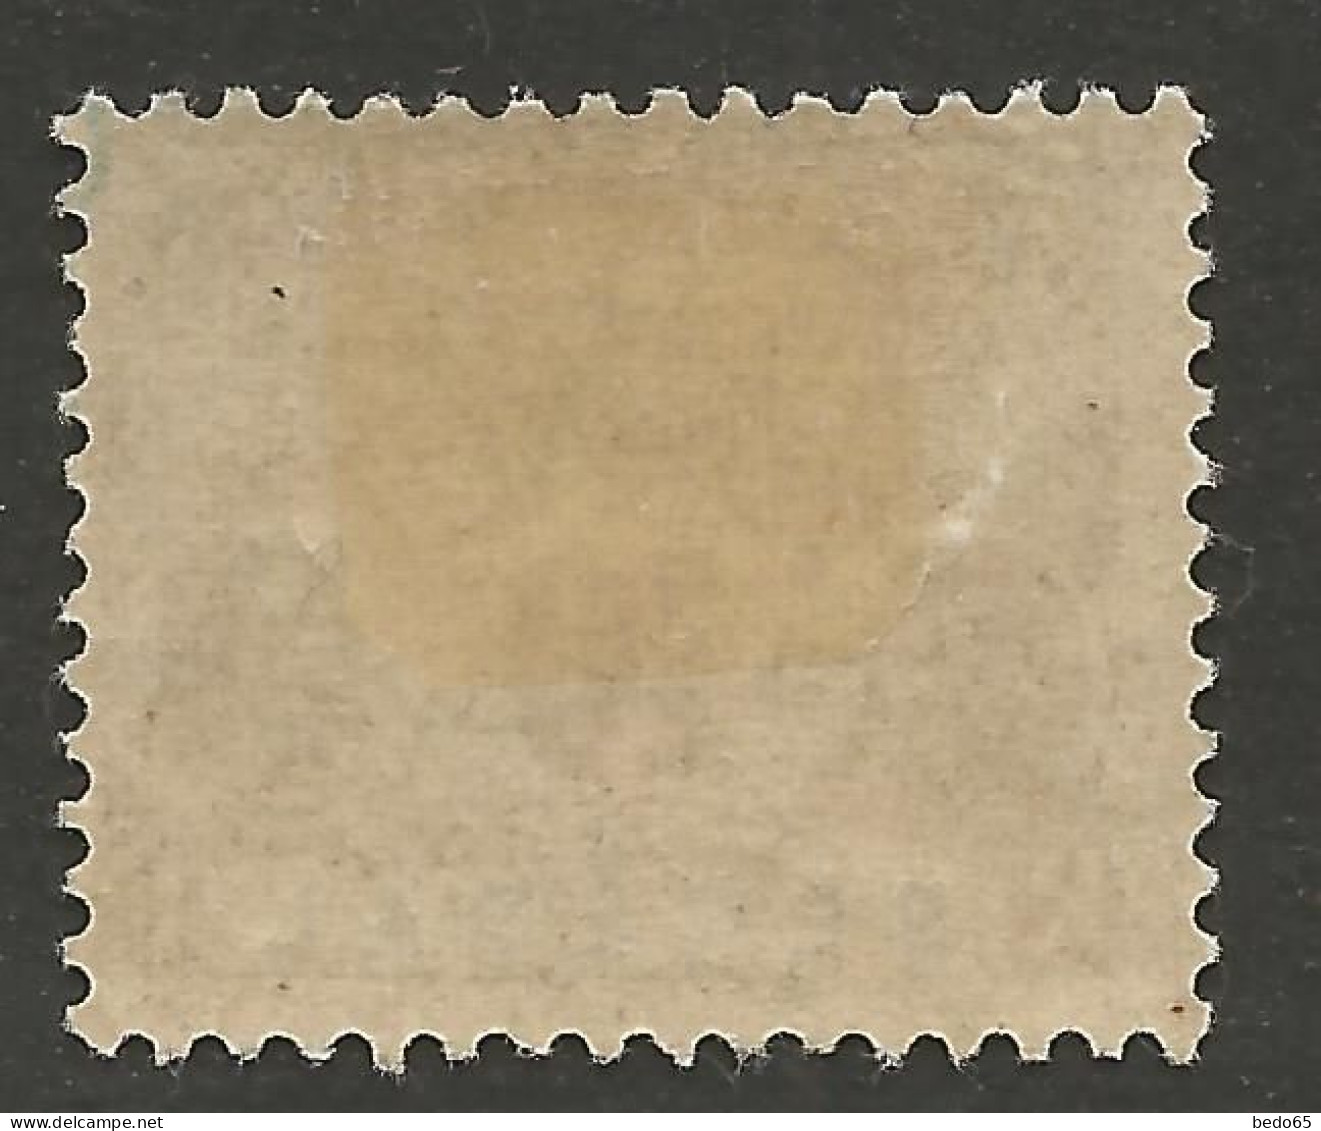 SENEGAL TAXE N° 5 NEUF*  CHARNIERE / Hinge / MH - Postage Due